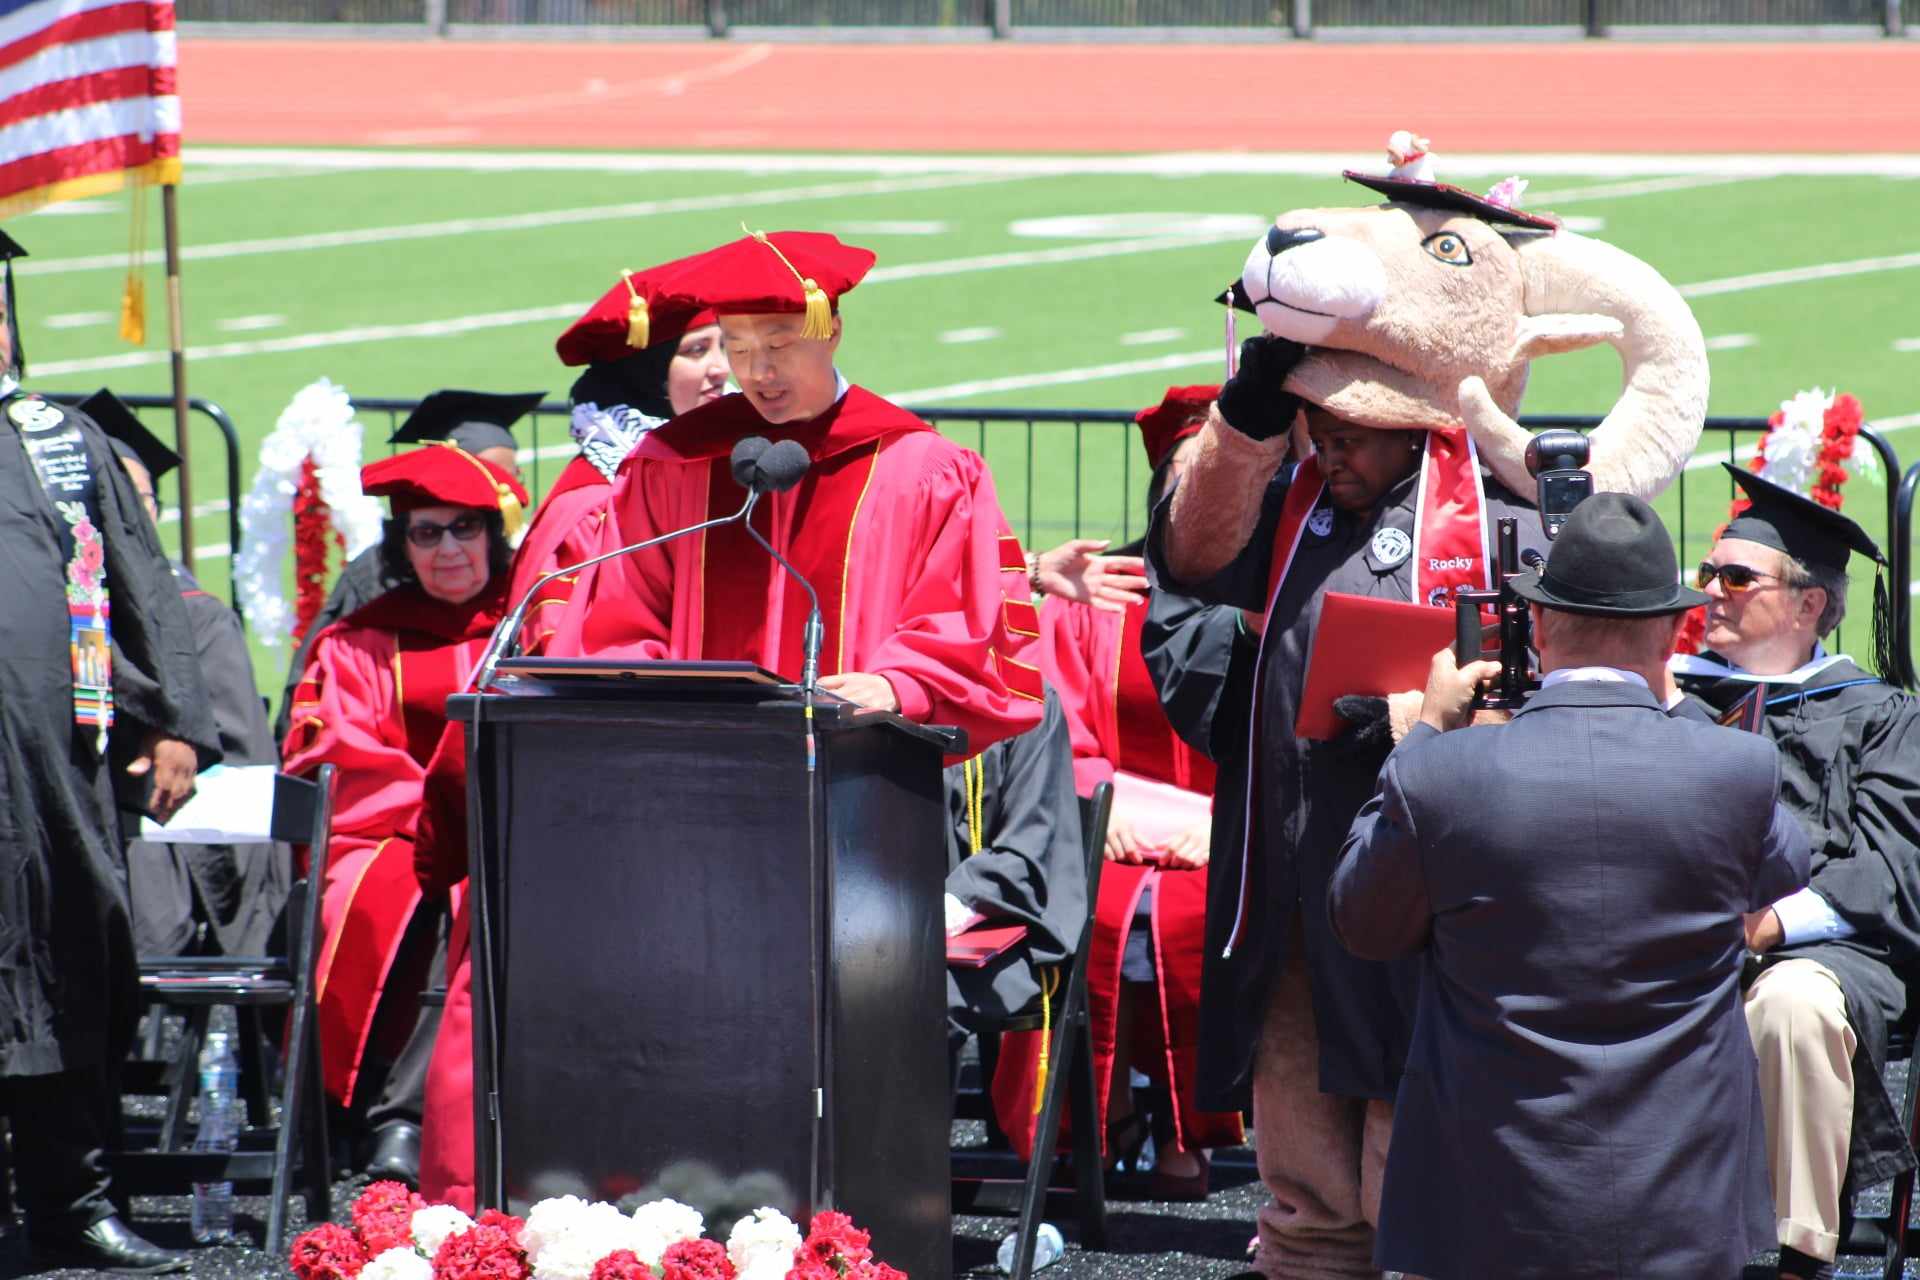 Mascot lifts up mask while on stage at graudation.